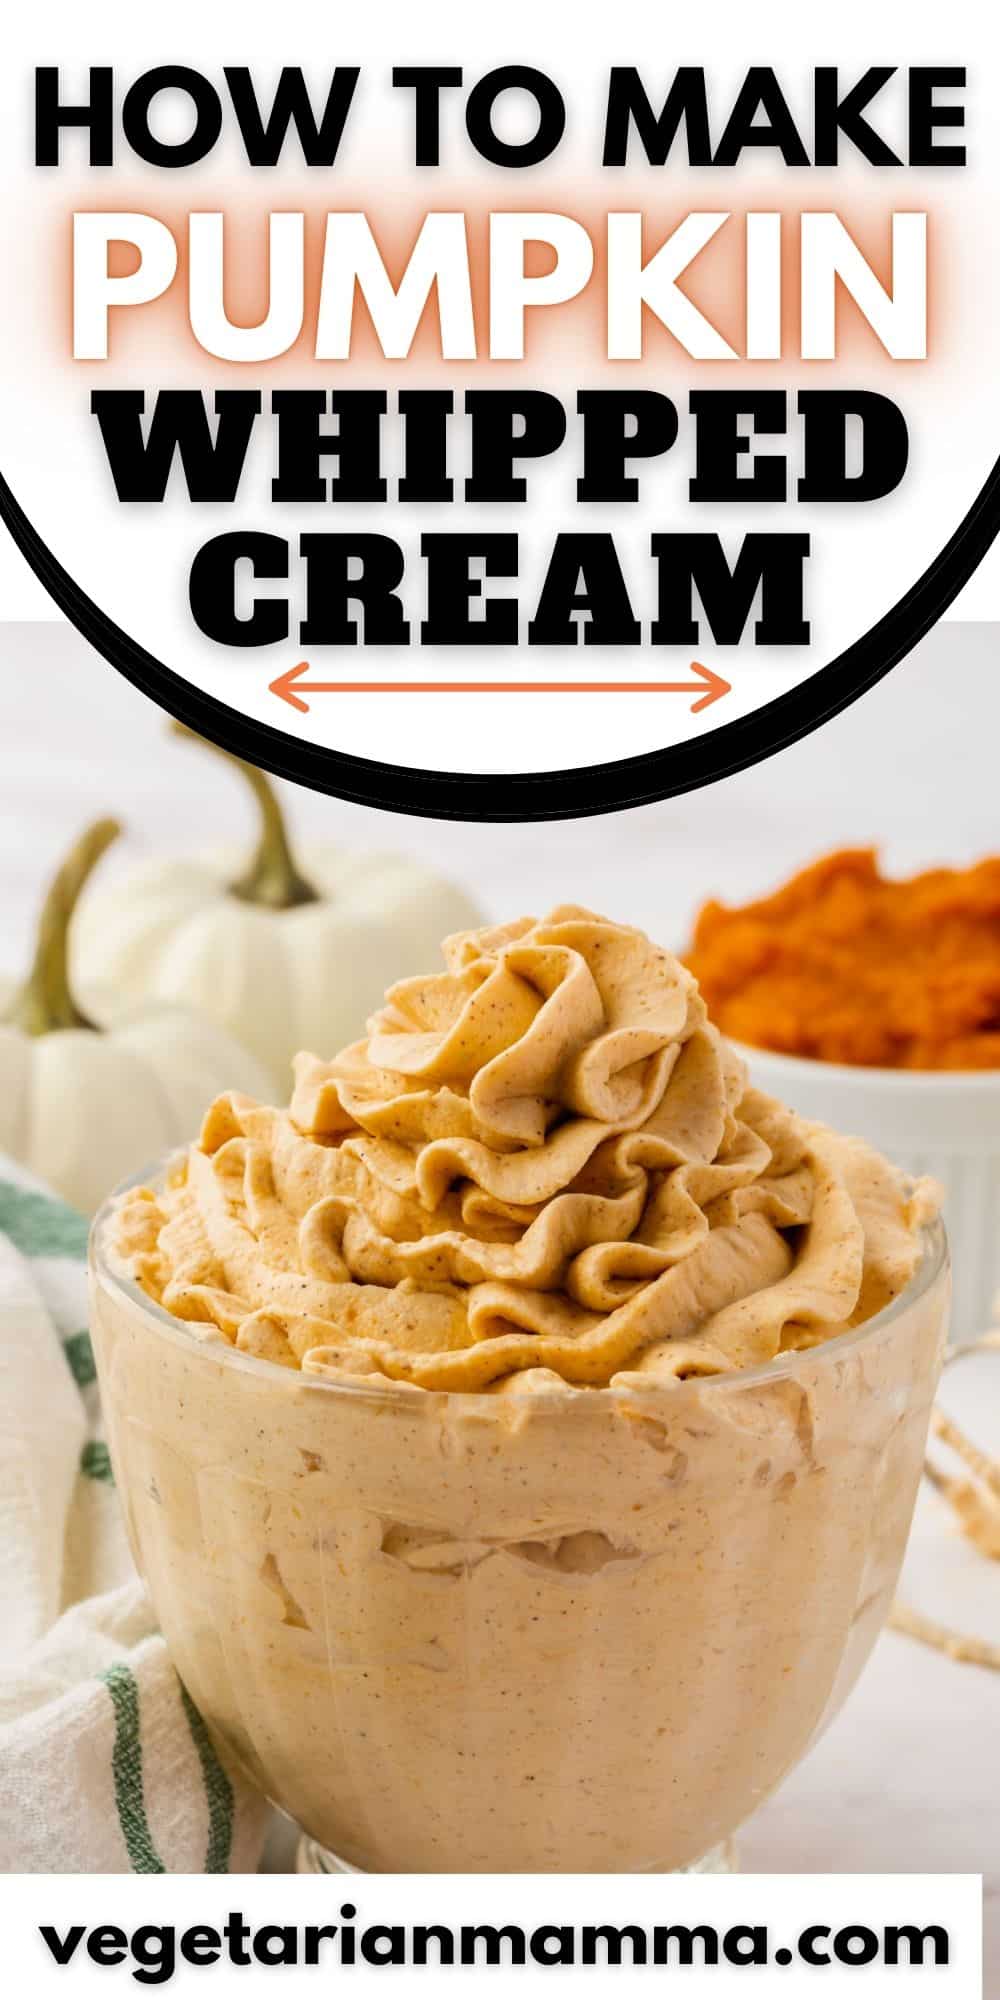 Fluffy, sweet, perfectly spiced, and fortified with real pumpkin puree, this recipe for Pumpkin Whipped Cream is the best ever!